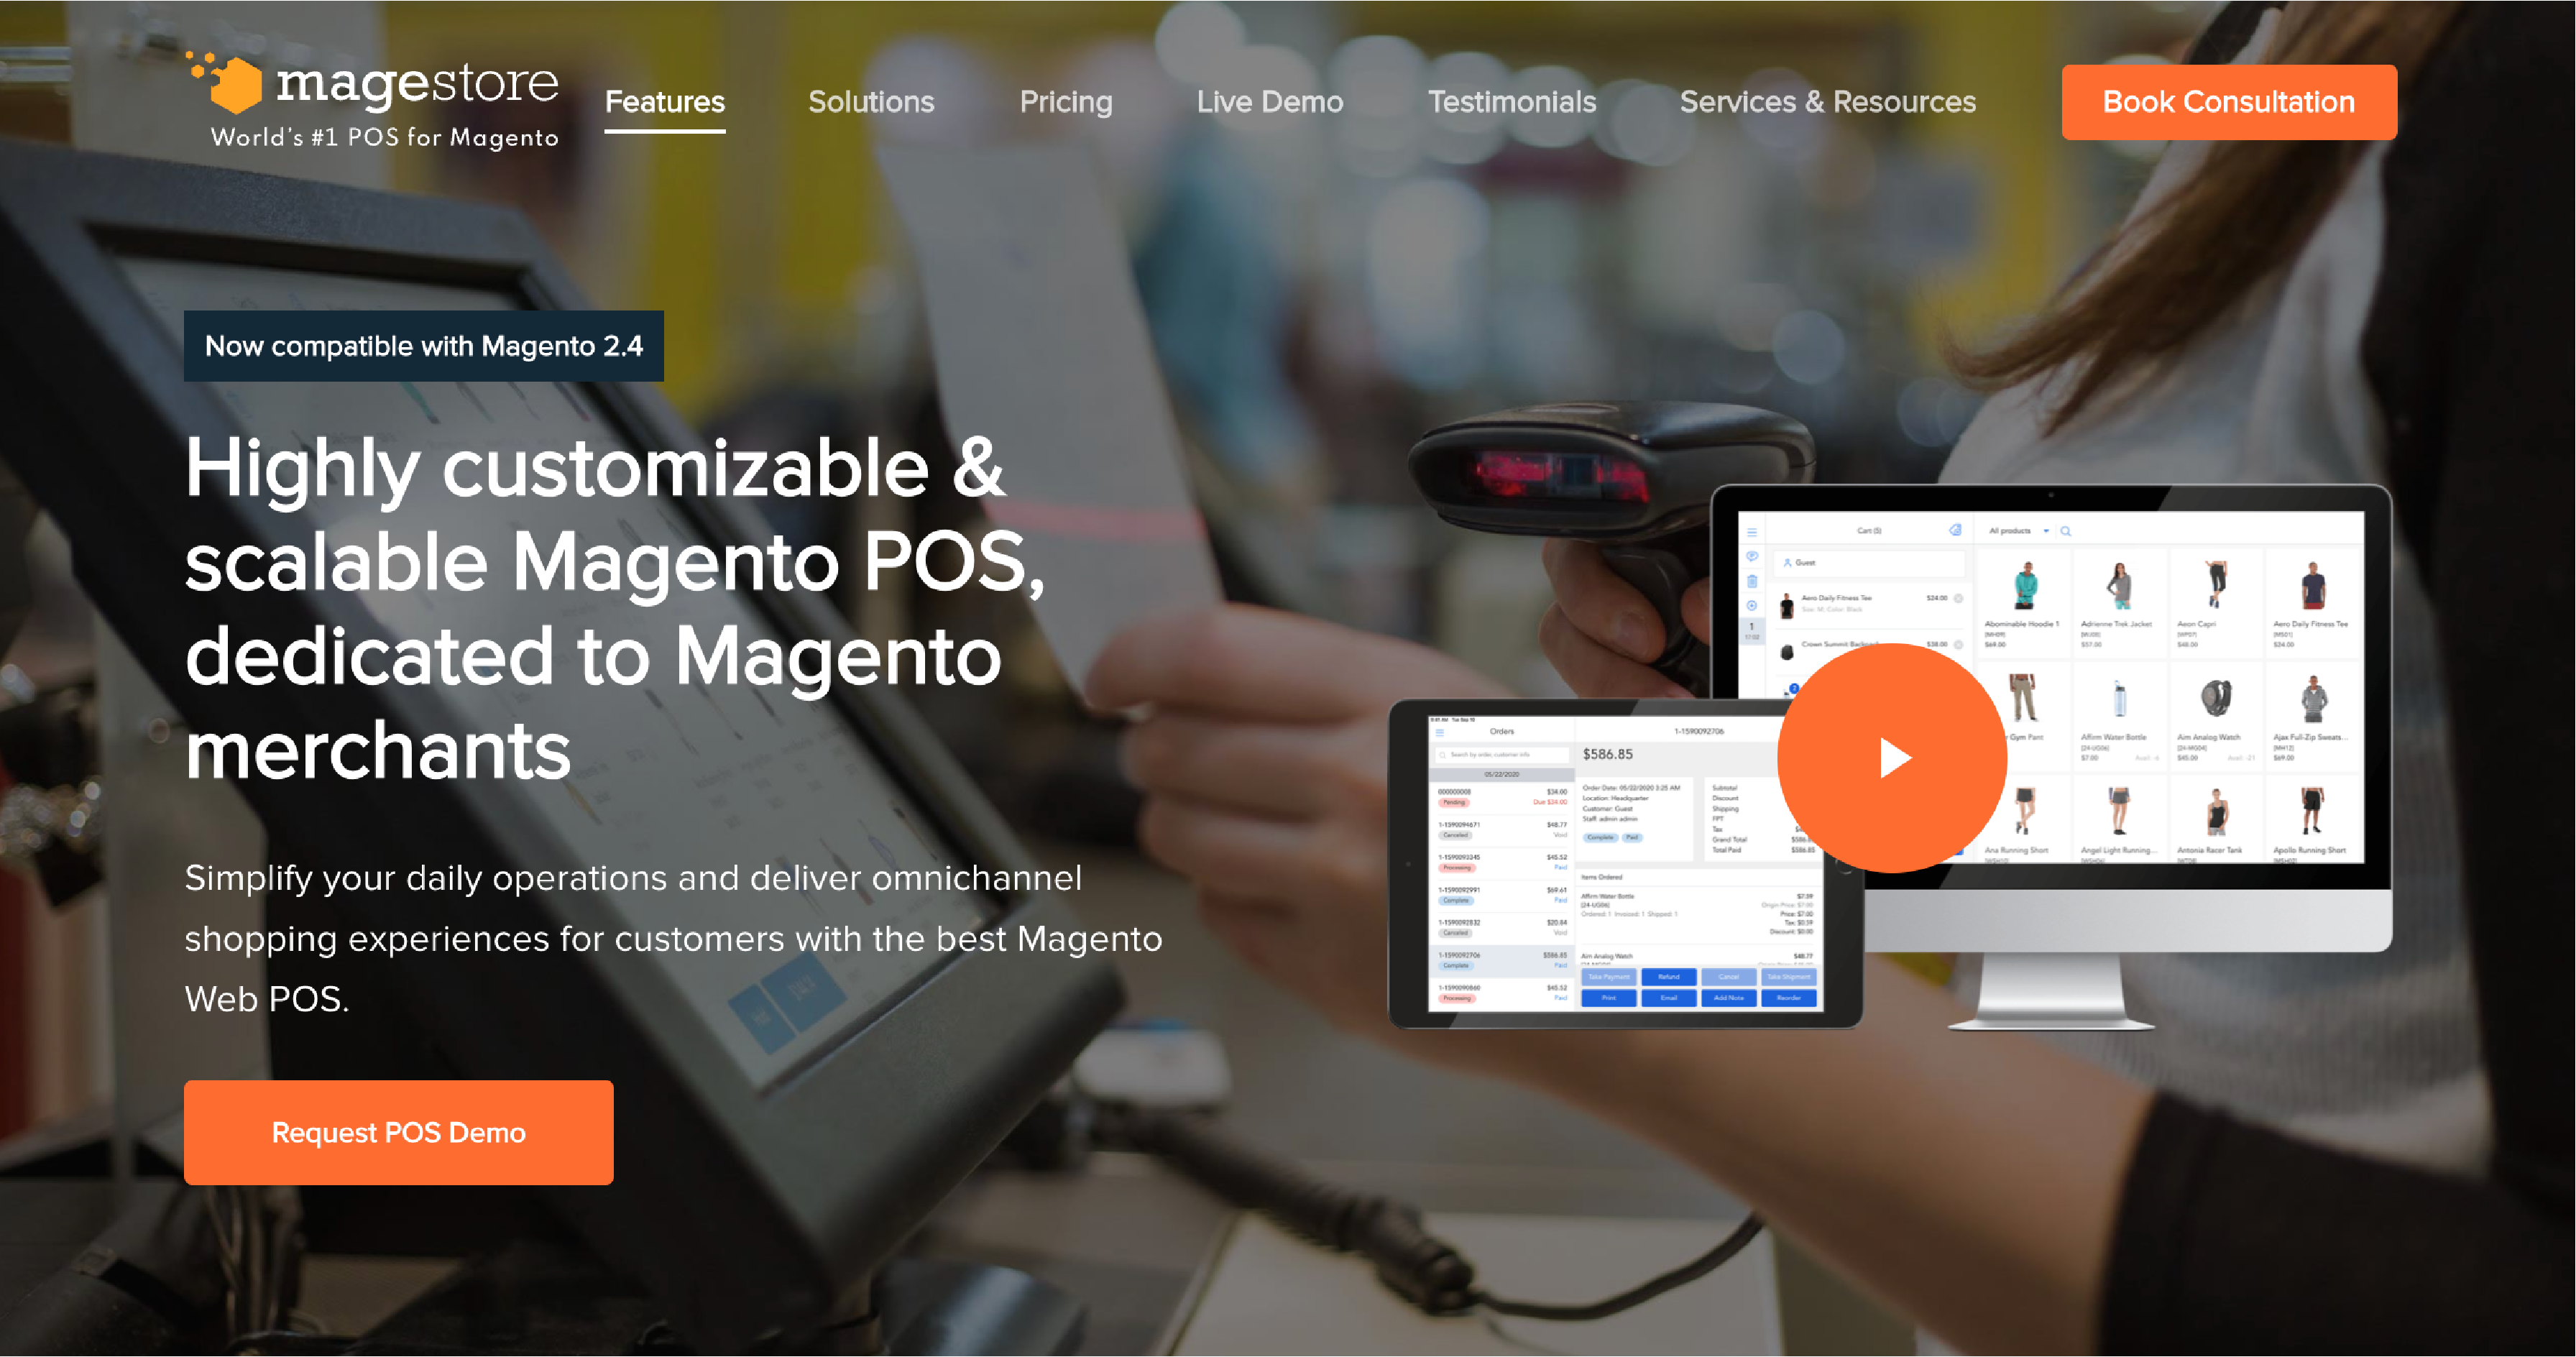 Magento POS Reporting by Magestore designed for Magento POS systems and comprehensive report generation